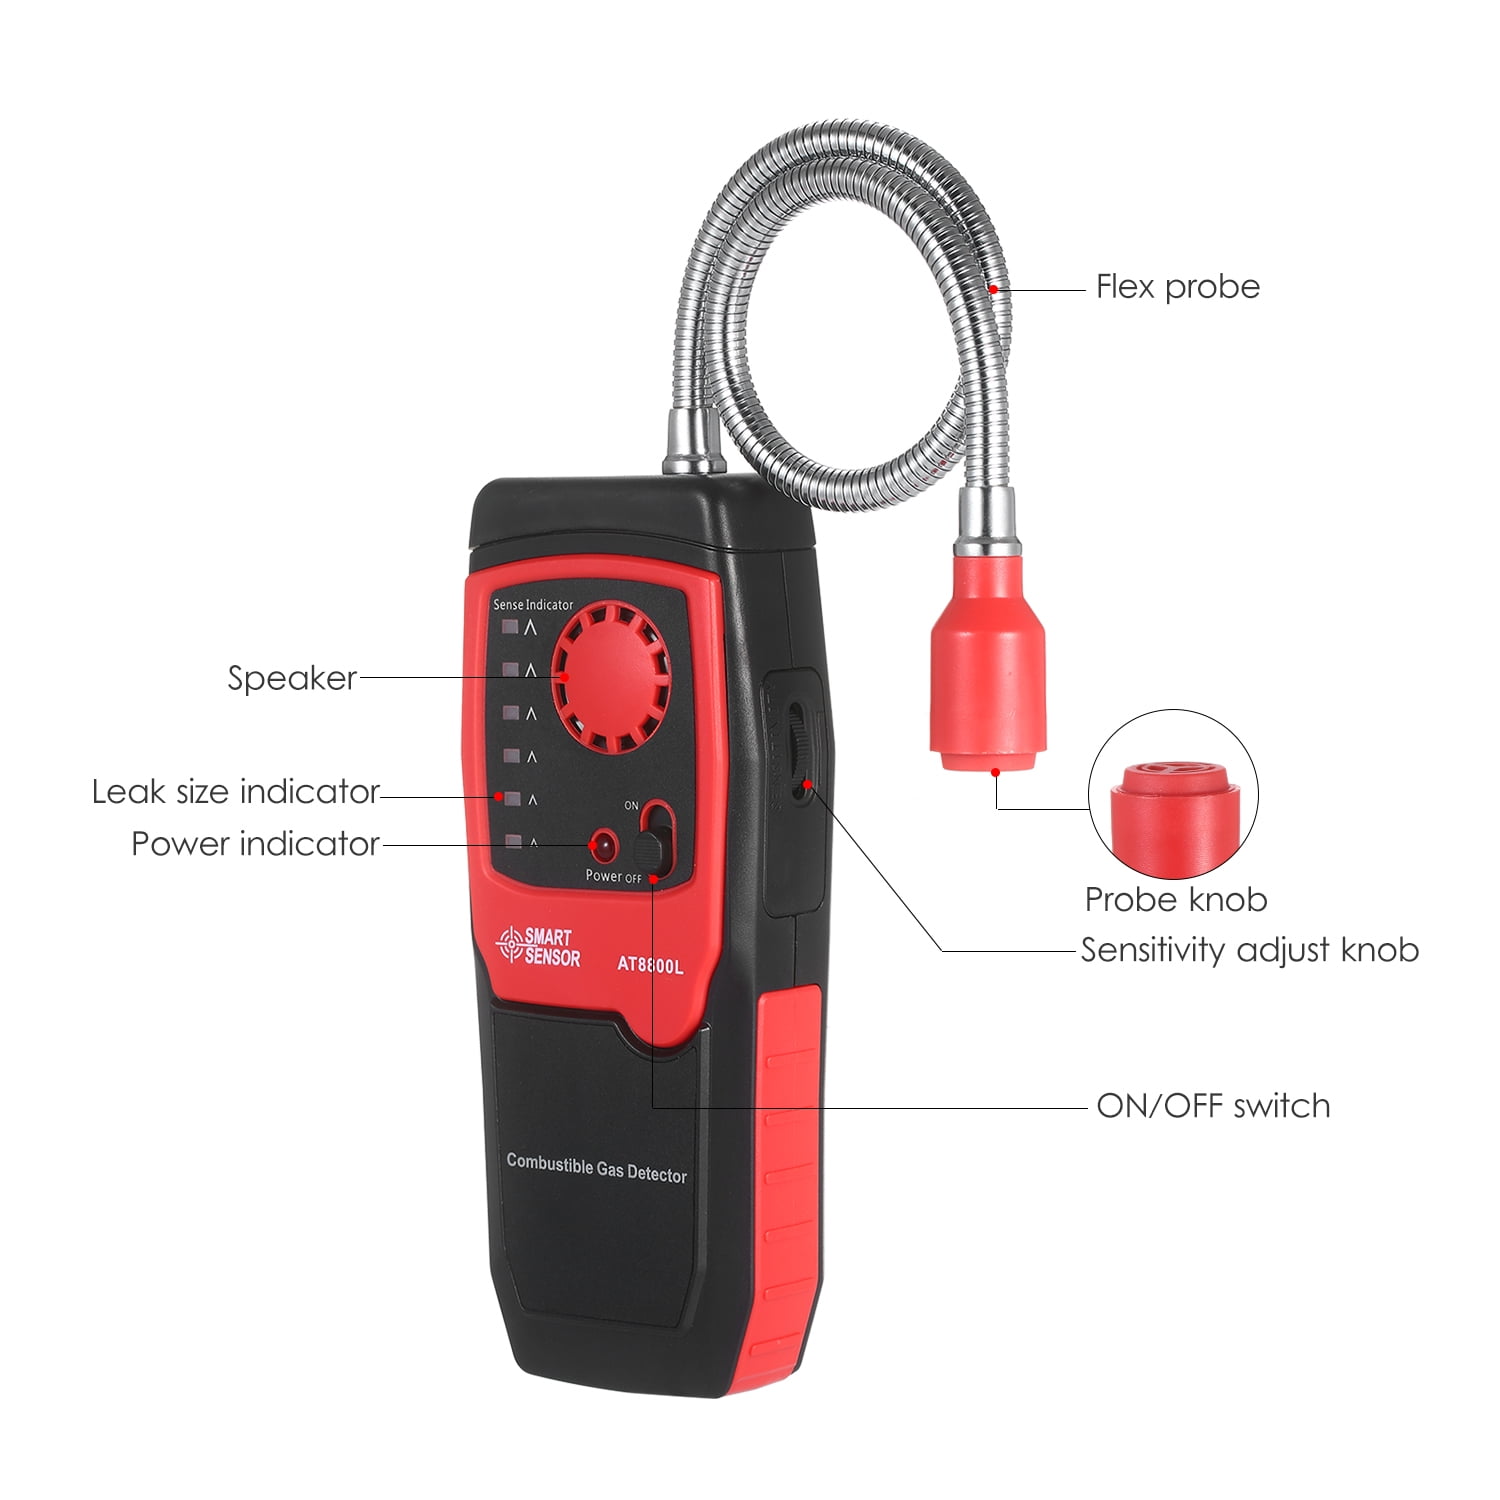 Portable Gas Leak Detector Combustible Propane Methane Gas Sensorr with Sound Warning Adjustable Sensitivity and Flex Probe Natural Gas Detector